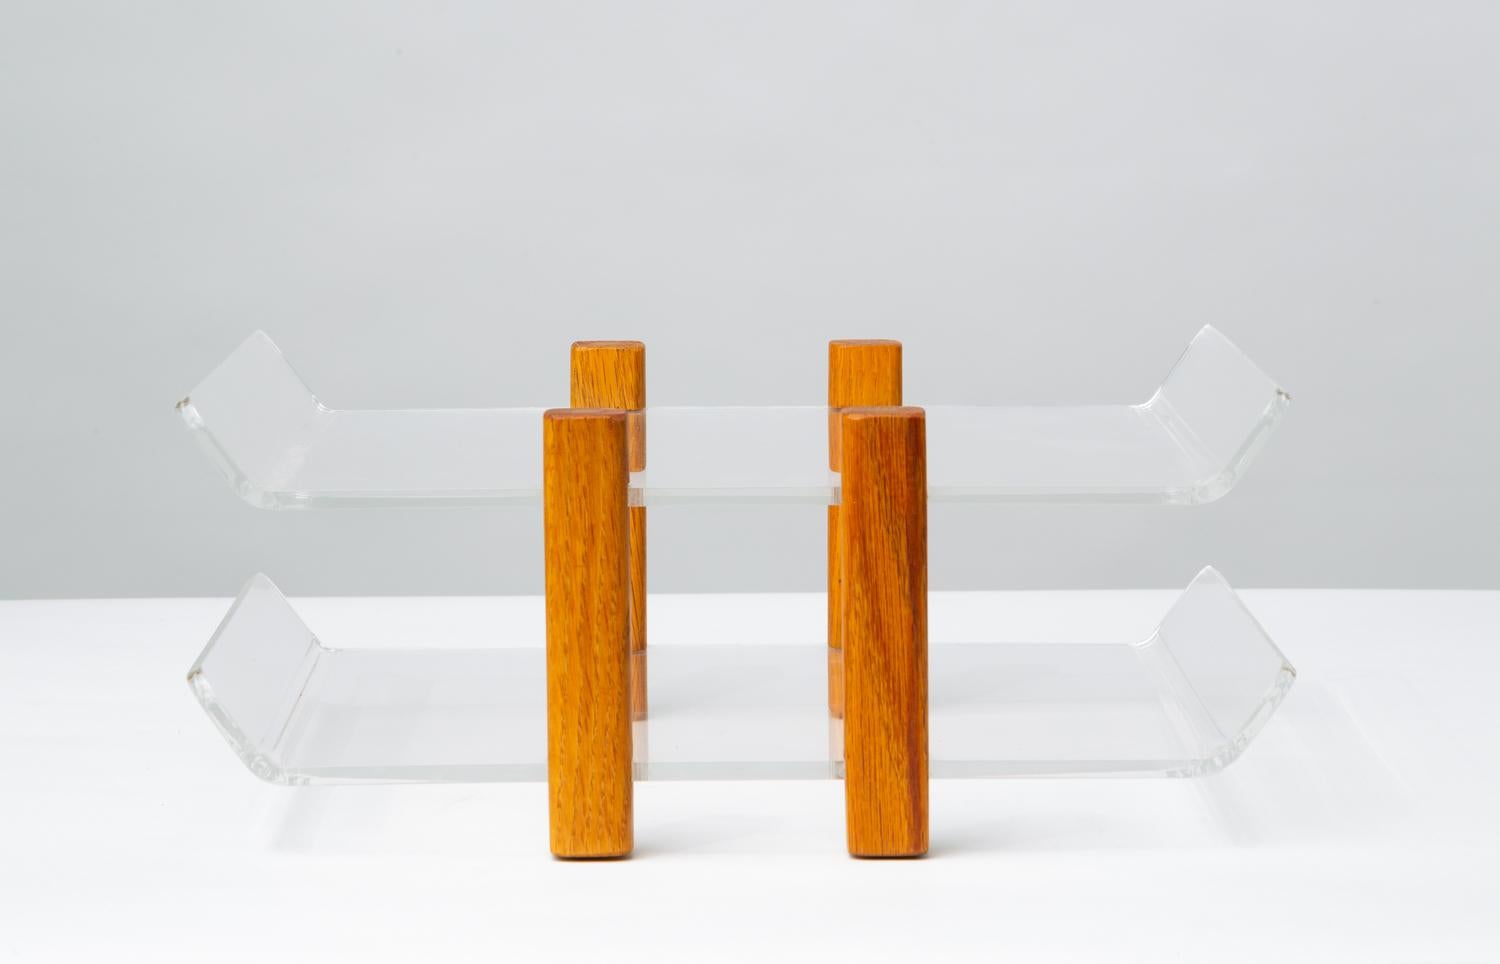 A simple paper tray with lucite in and out shelves separated by notched posts of solid oak. Each shelf is raised at the edges to keep papers in place. The four posts are square with rounded edges, and a central peg keeps the shelves in